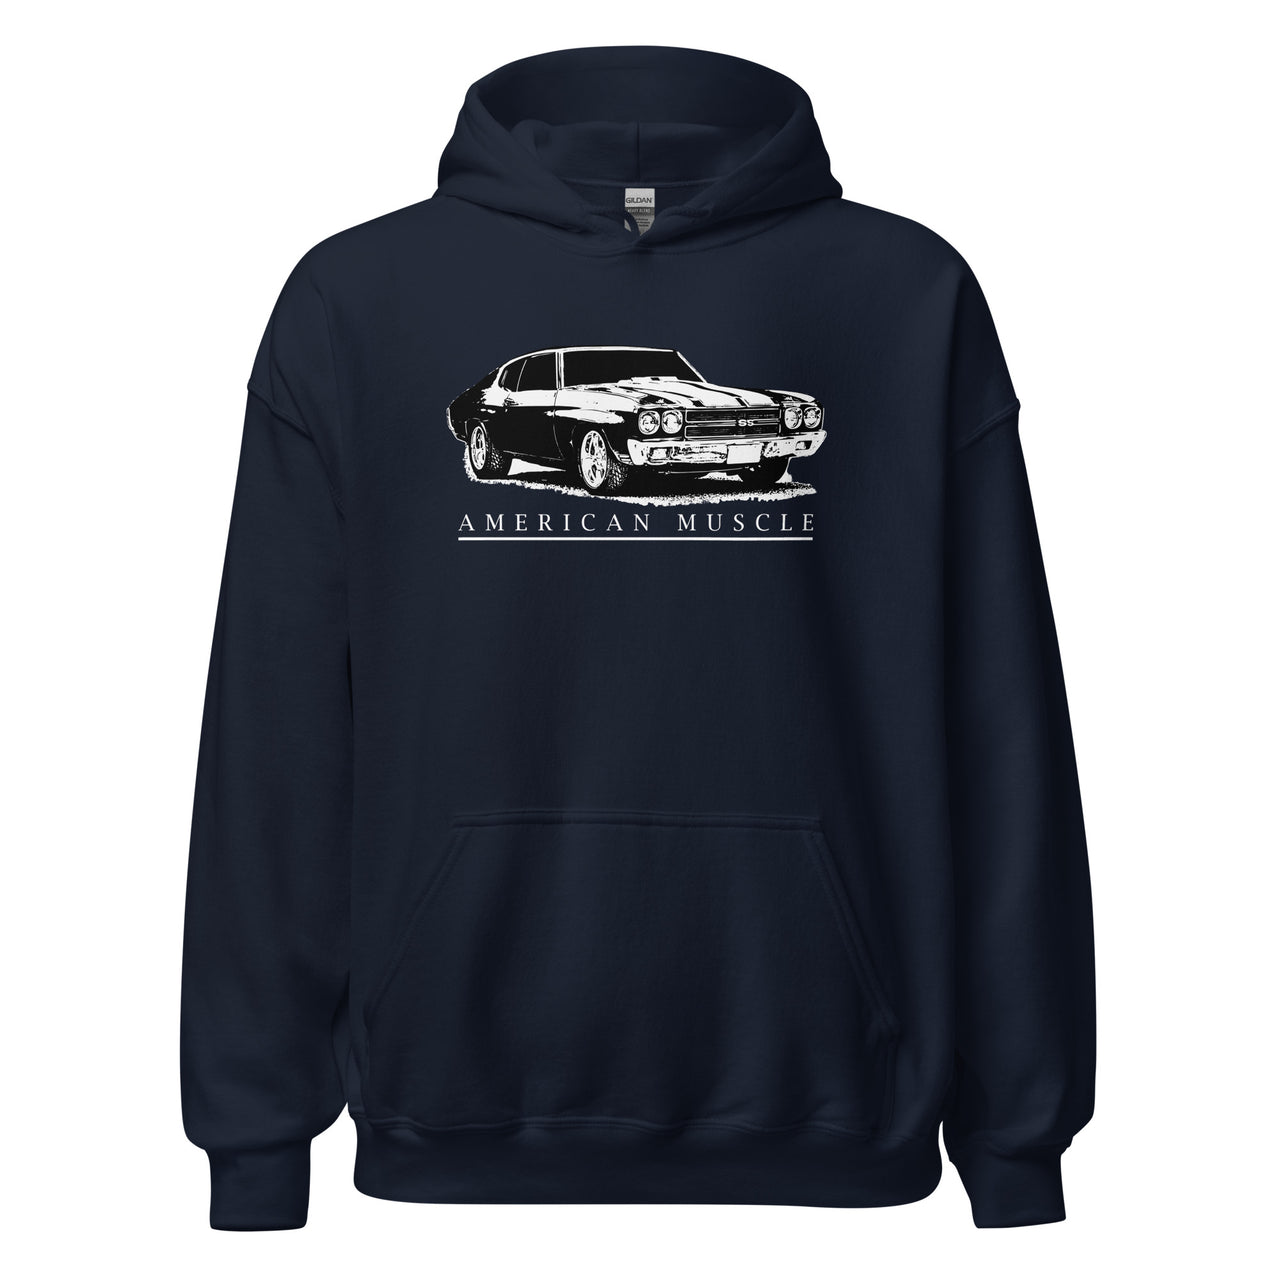 1970 Chevelle SS Hoodie in navy